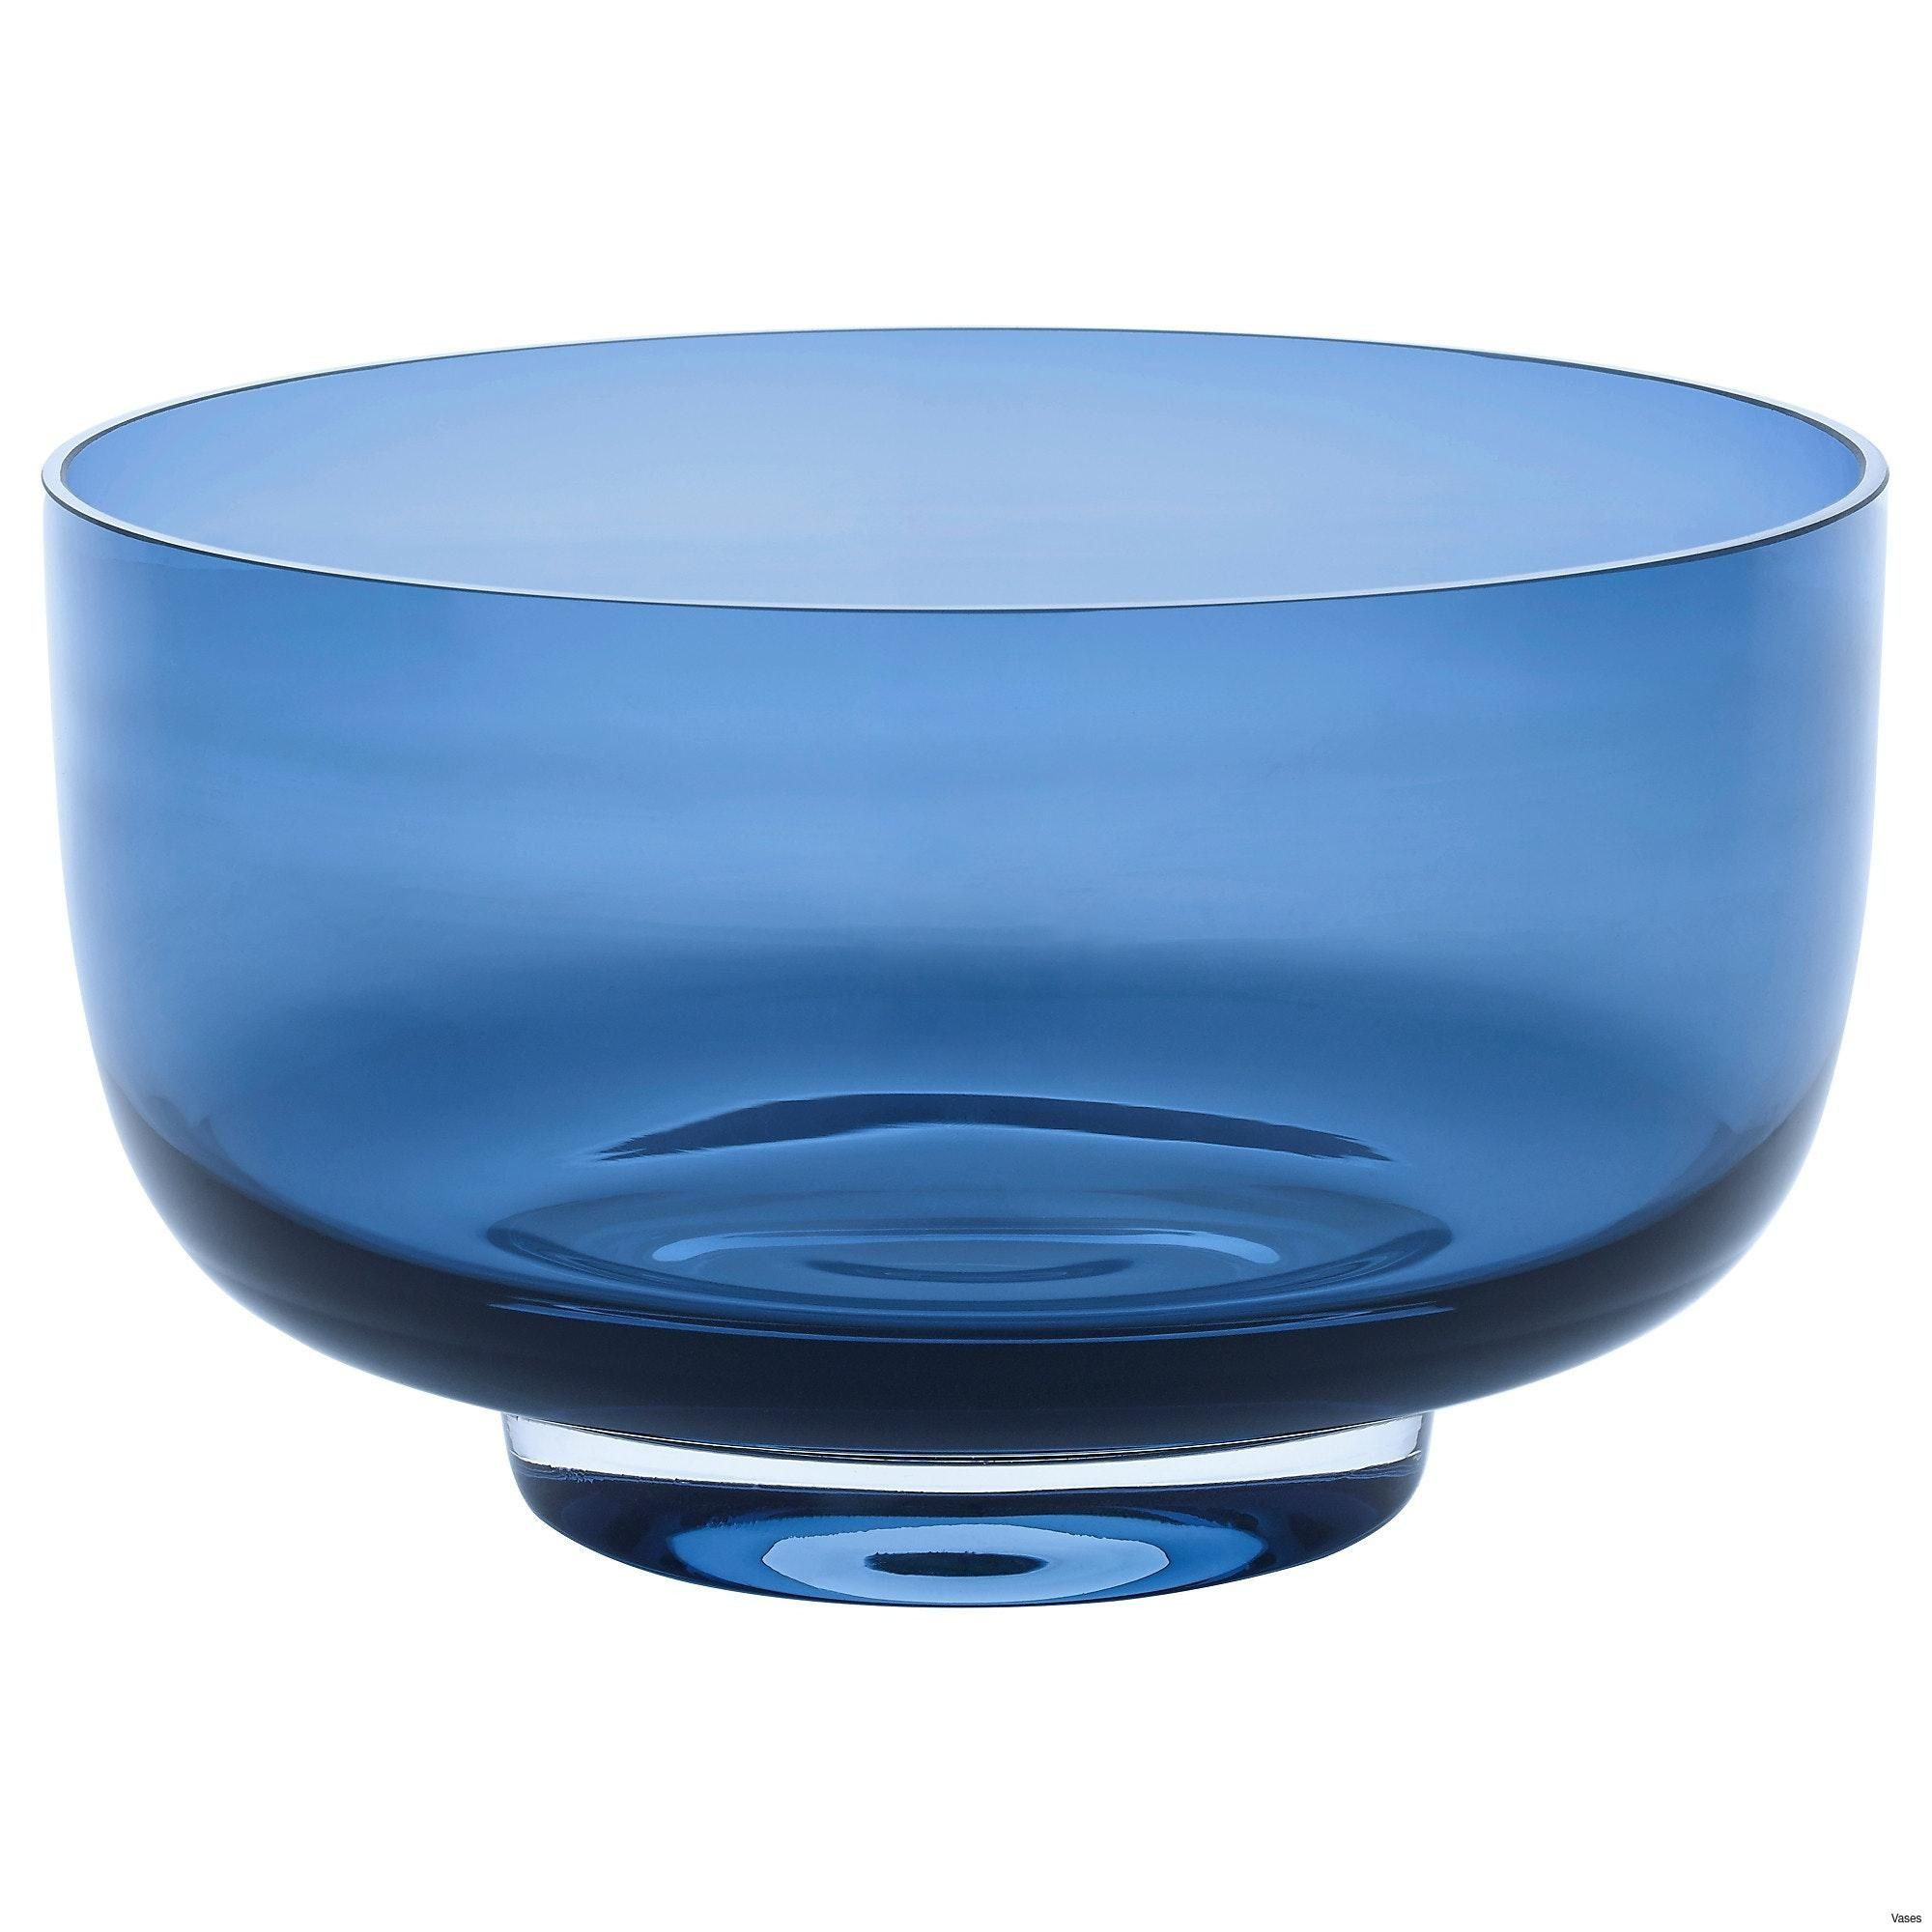 25 Perfect Lenox Crystal Vase 2024 free download lenox crystal vase of 23 blue crystal vase the weekly world with decorative glass bowl new living room ikea vases awesome pe s5h